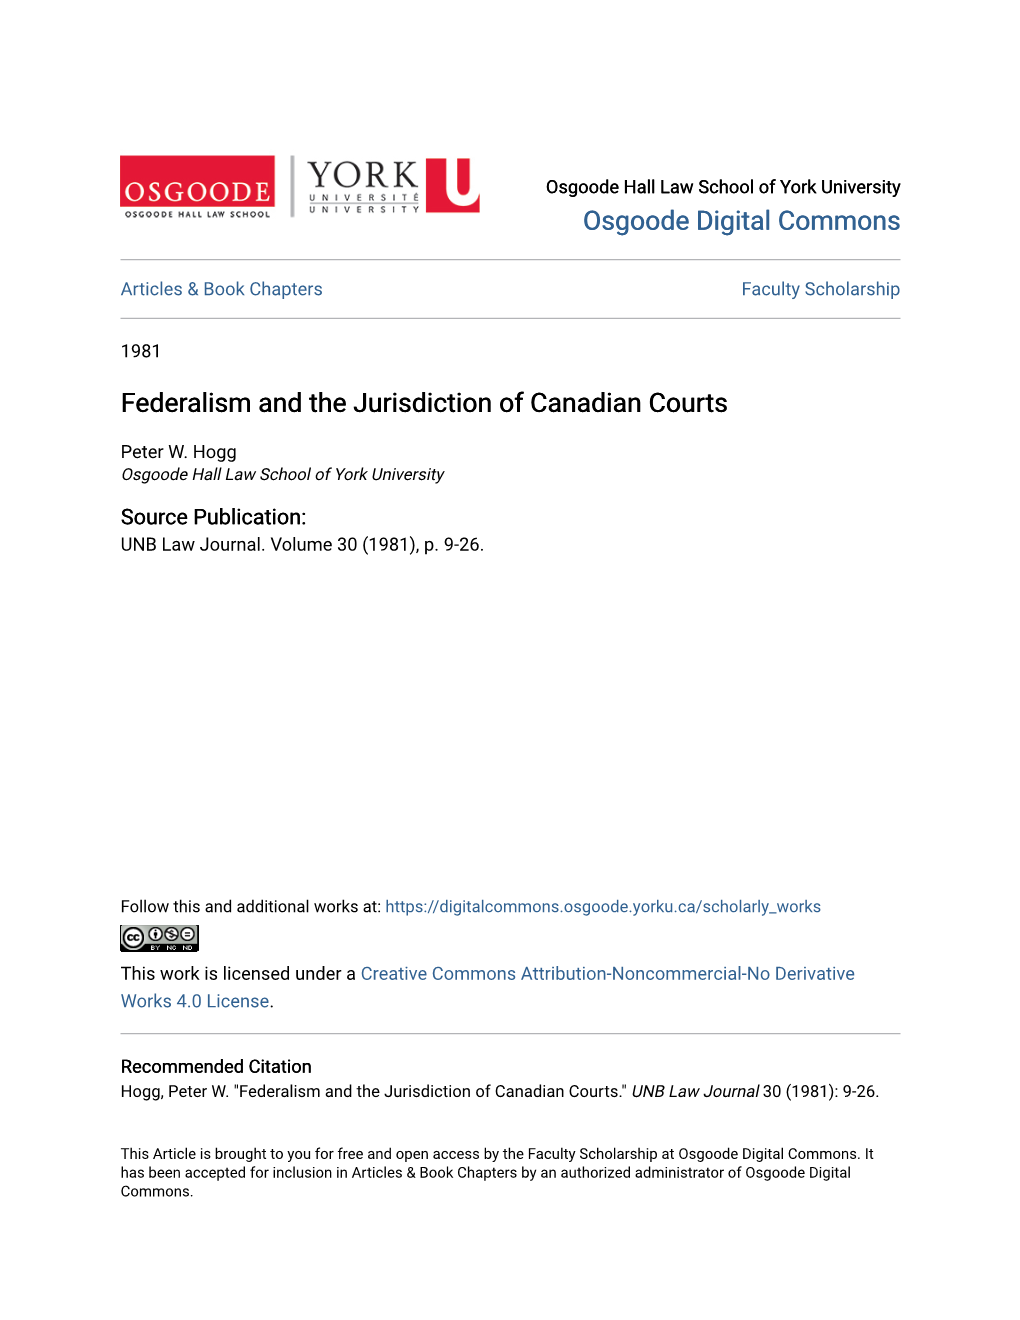 Federalism and the Jurisdiction of Canadian Courts